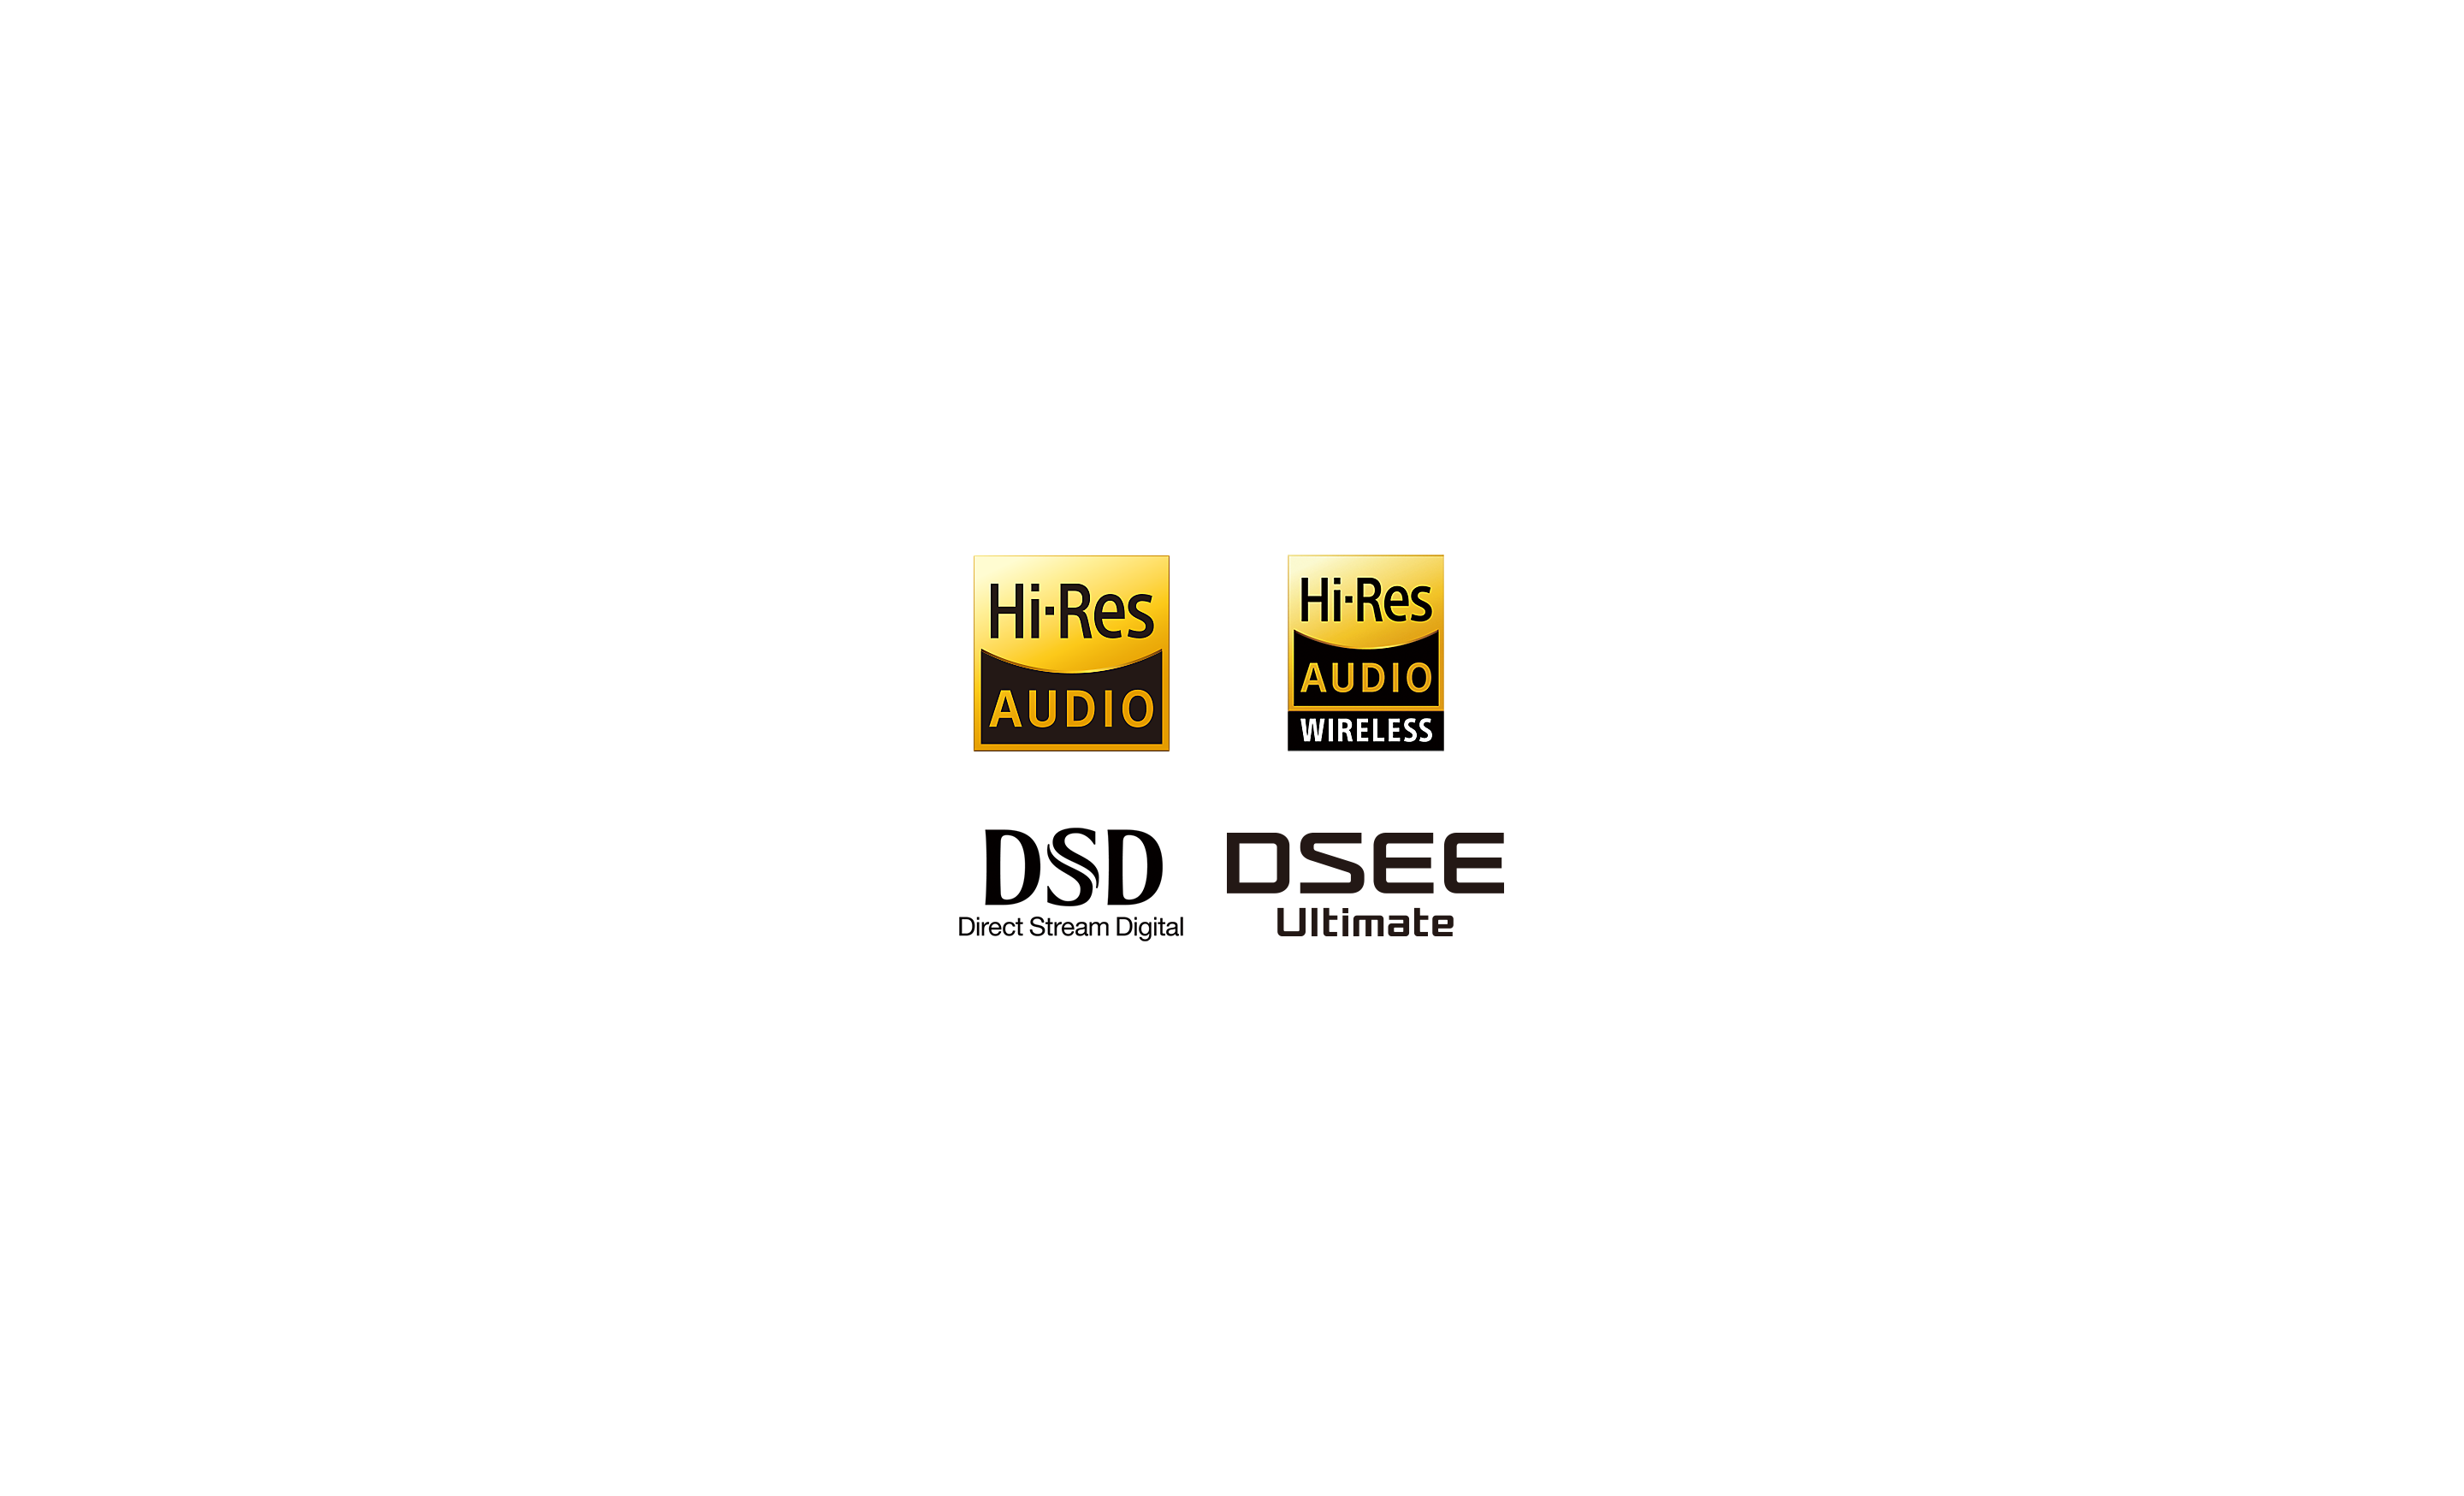 High-Res Audio, High-Res Audio WIRELESS, DSD & DSEE logo's.